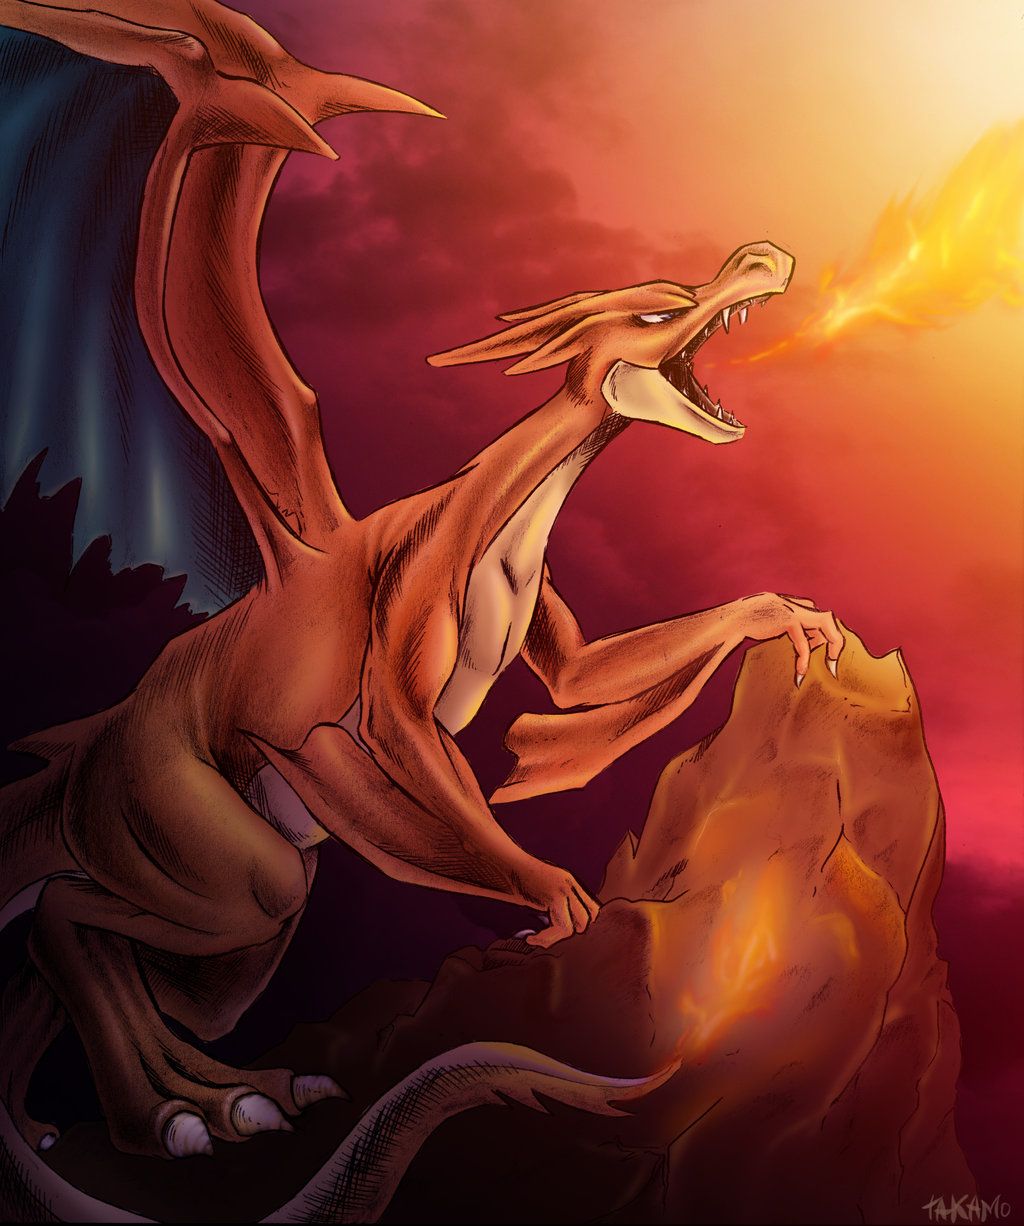 Charizard Iphone Wallpapers